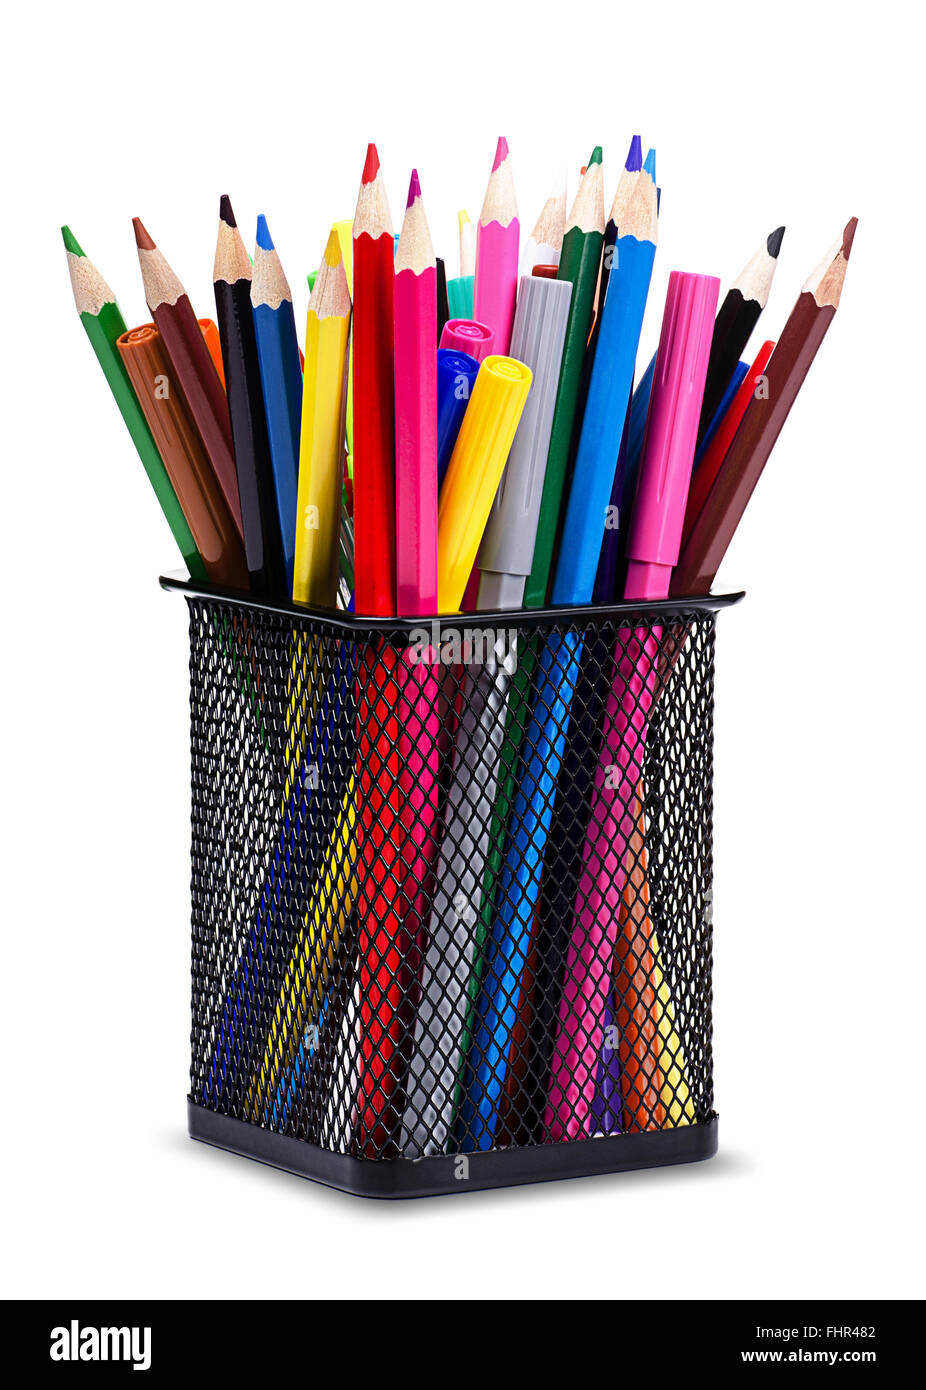 File:Crayons-metal.png - Wikimedia Commons